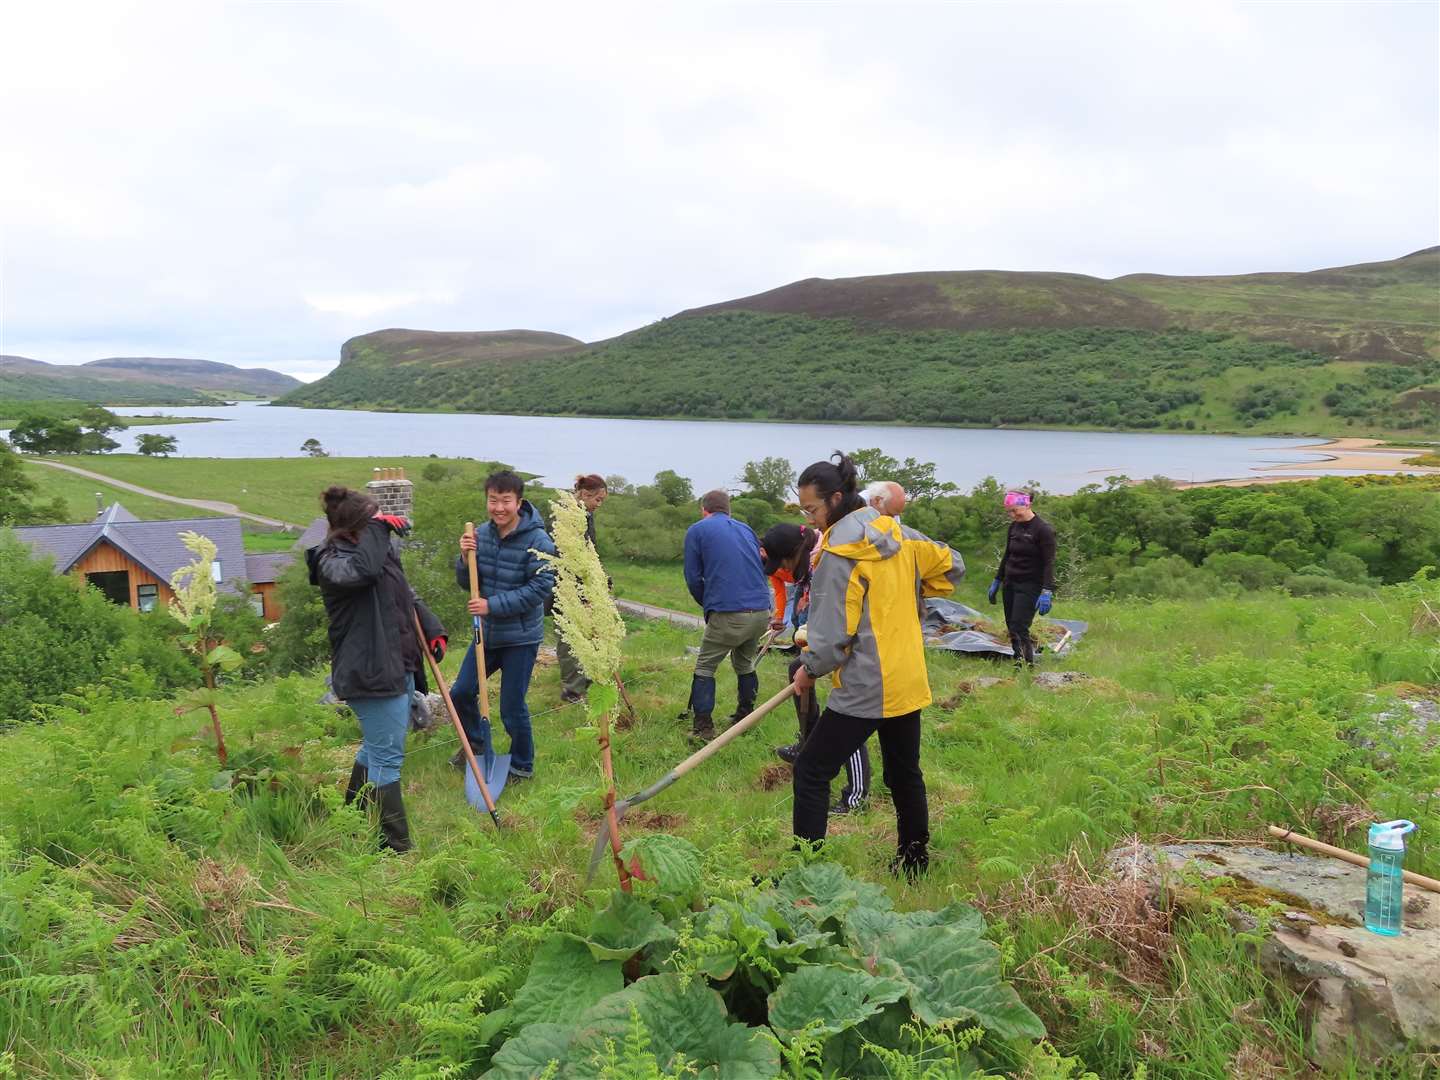 Several crowns of rhubarb were still growing in what was thought to have been a vegetable bed. Historic Environment Scotland archaeologist Kevin Grant took some stalks and made a sponge cake which he offered to diggers the following day.